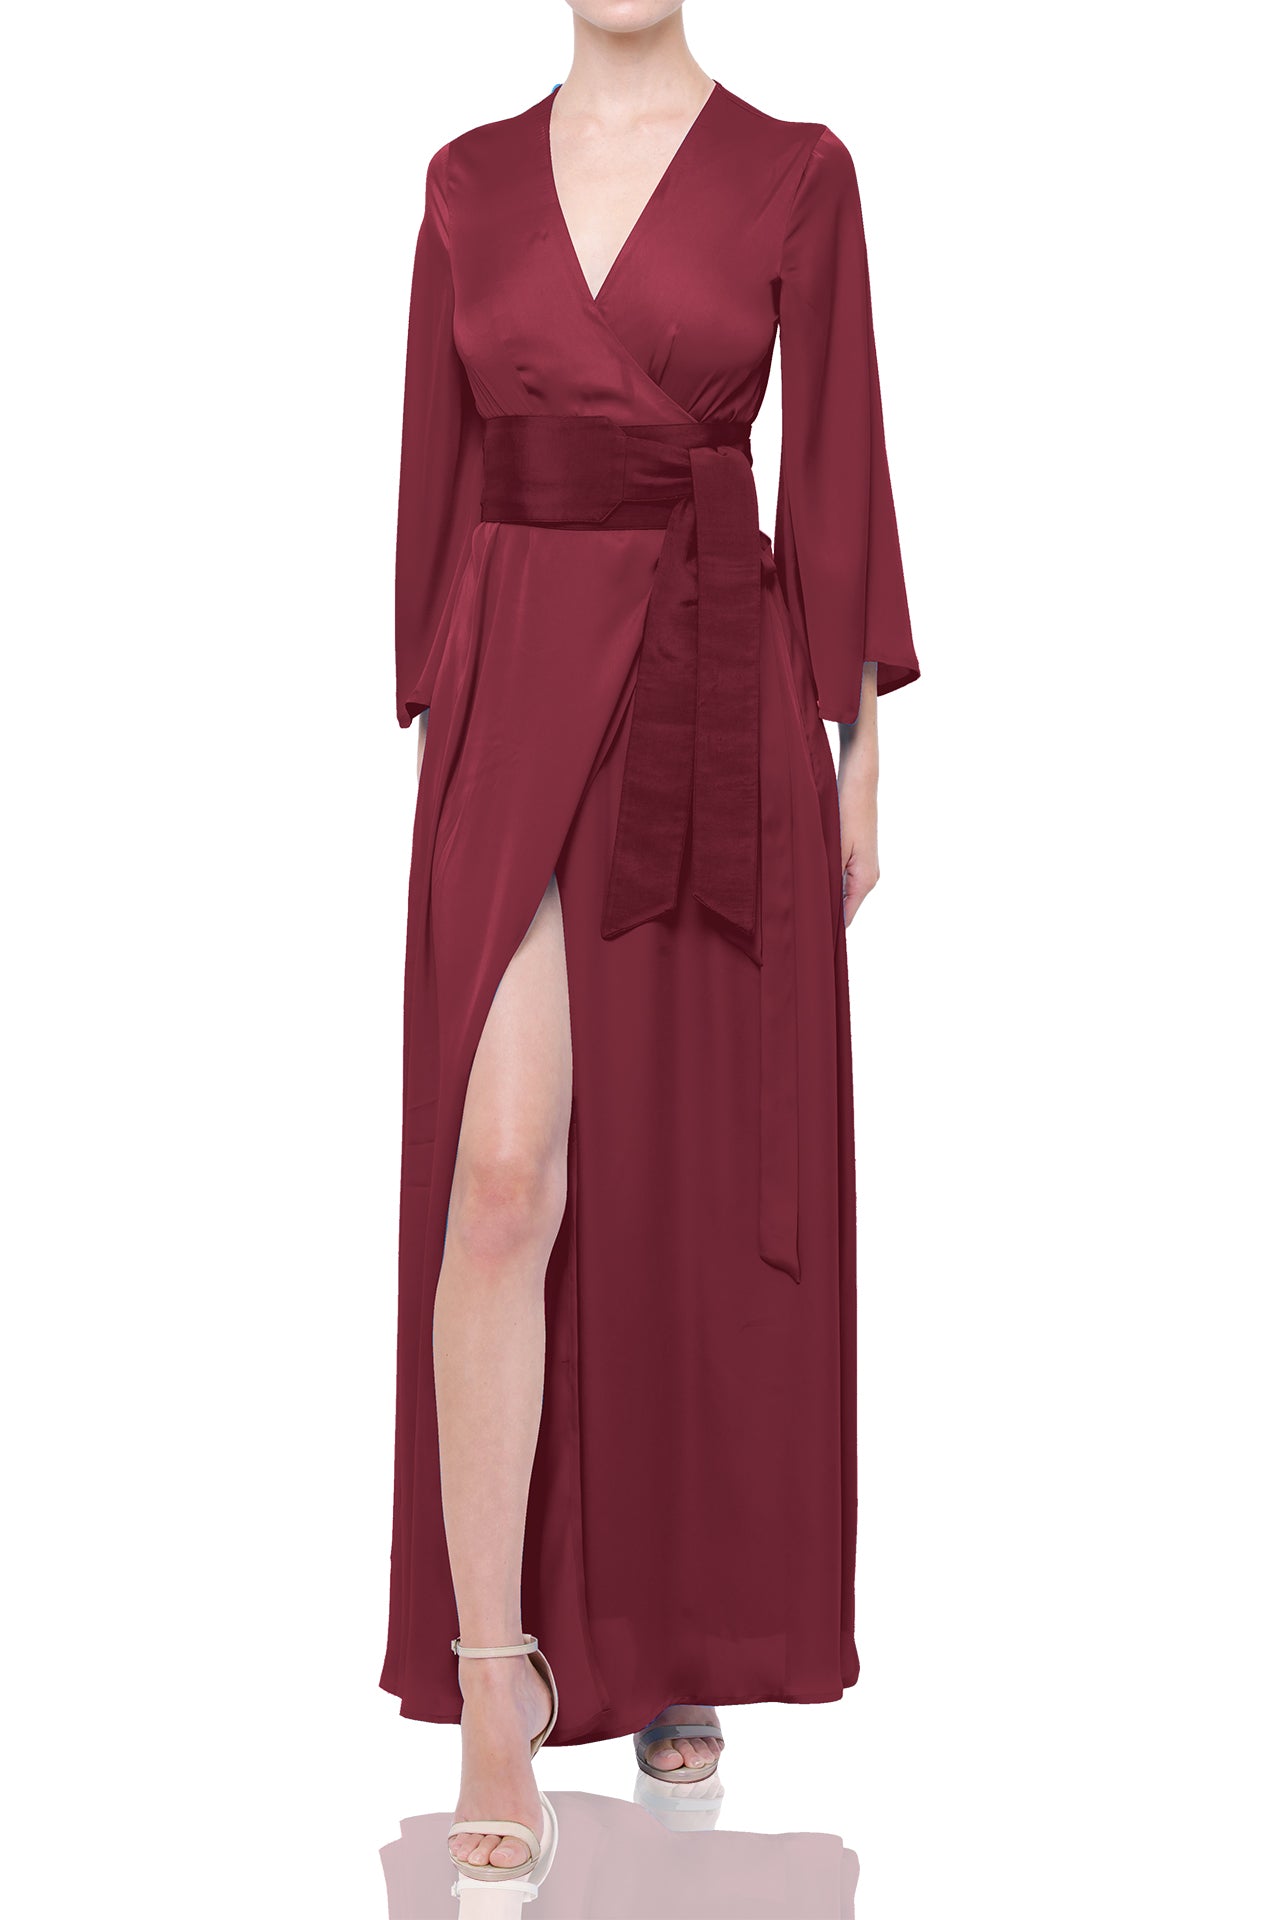 Solid Blood Stone Maxi Long Wrap Dress